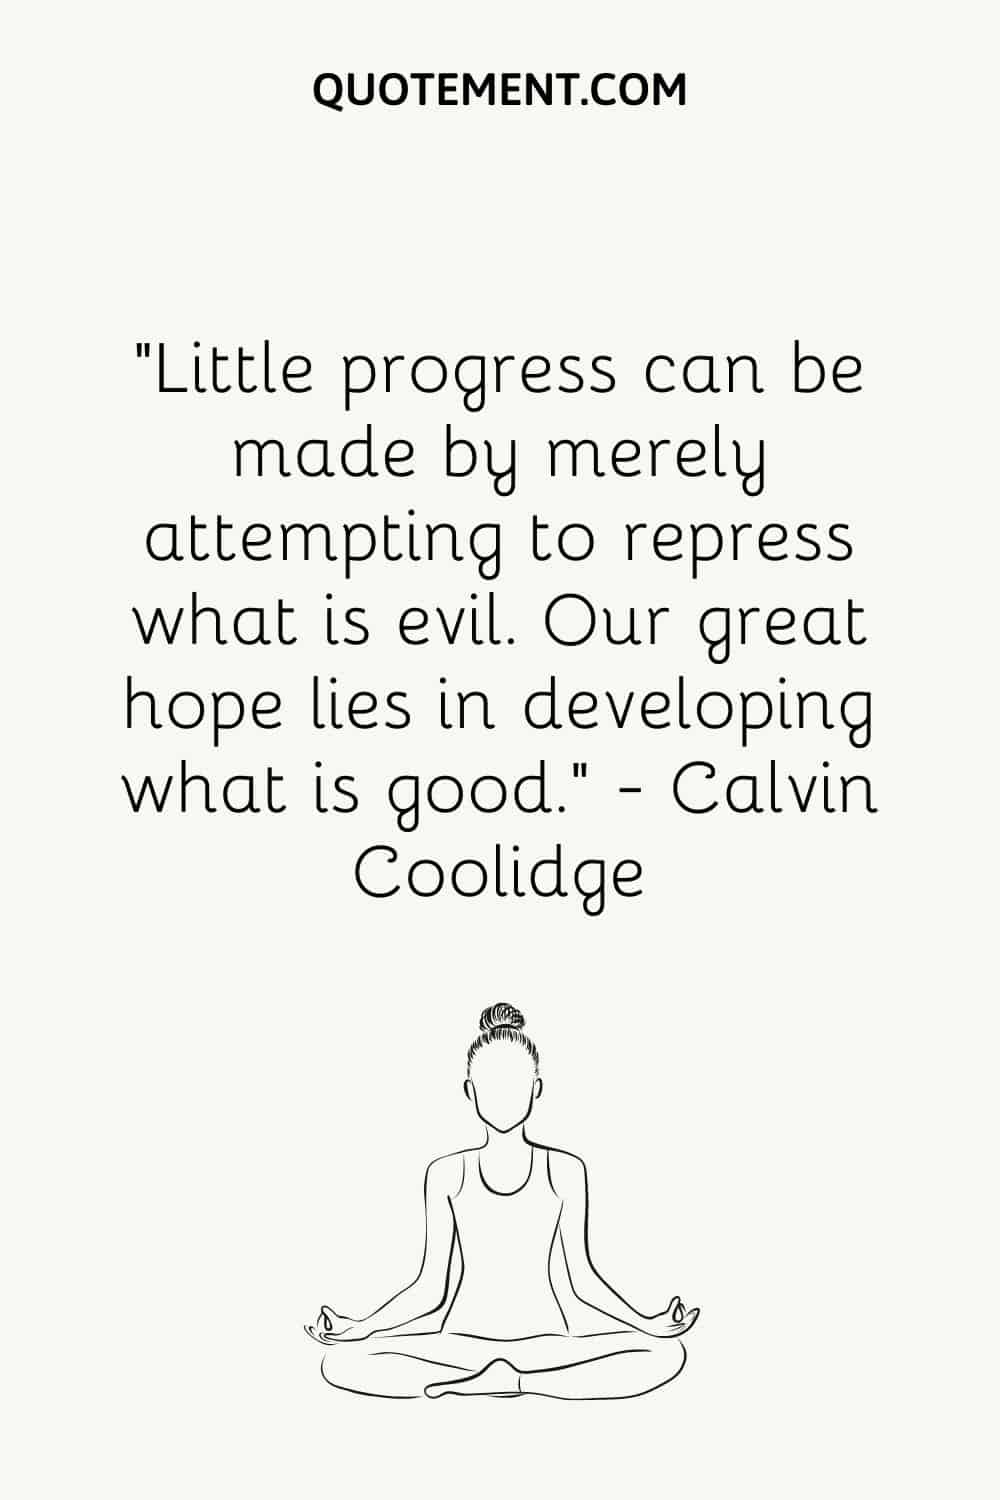 Little progress can be made by merely attempting to repress what is evil